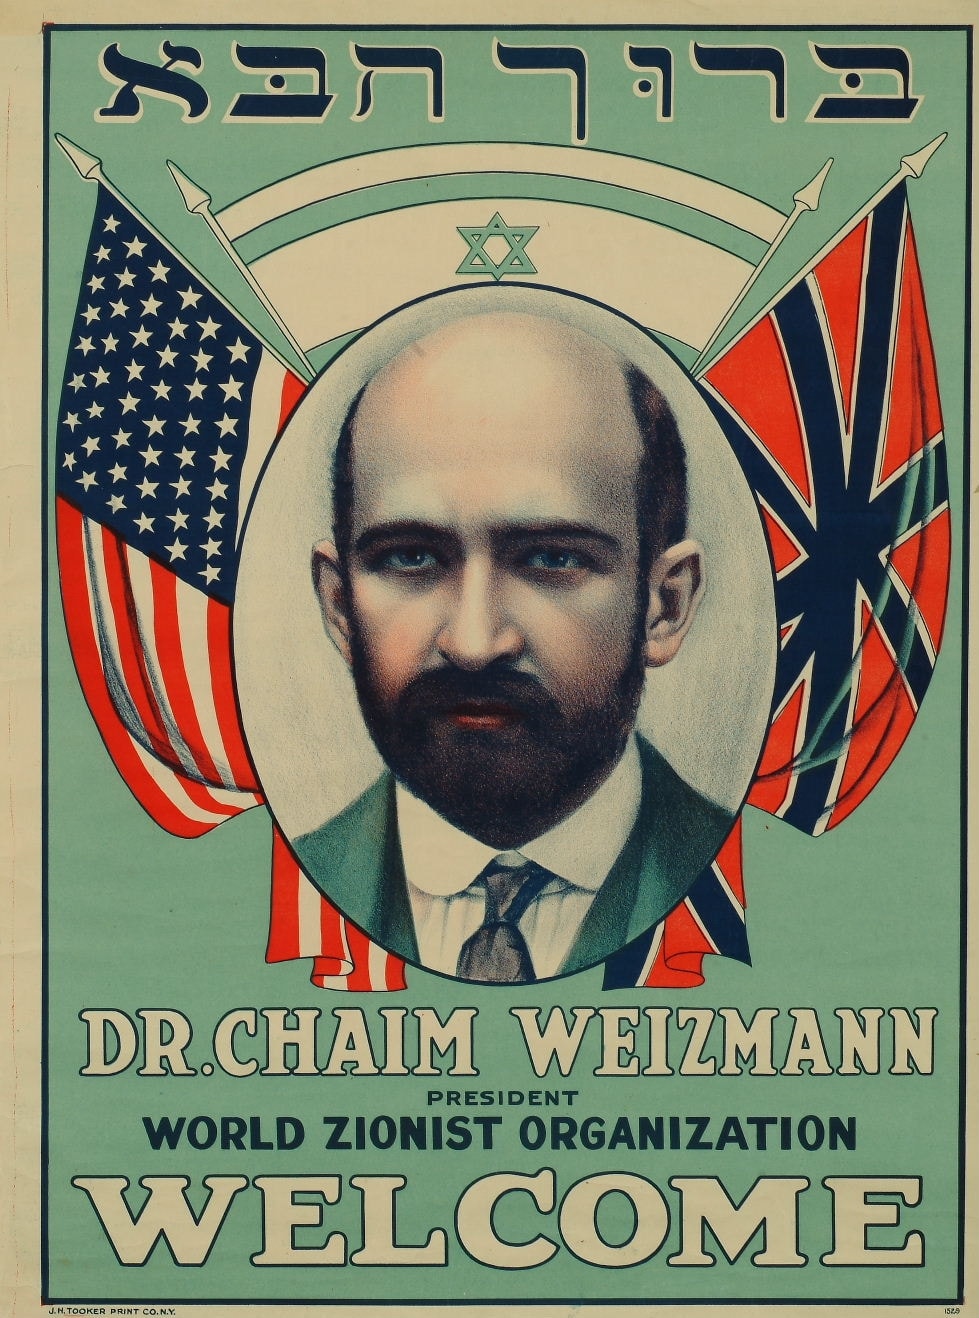 Chaim Weizmann, surrounded by flags of the United States, Britain, and the Zionist movement